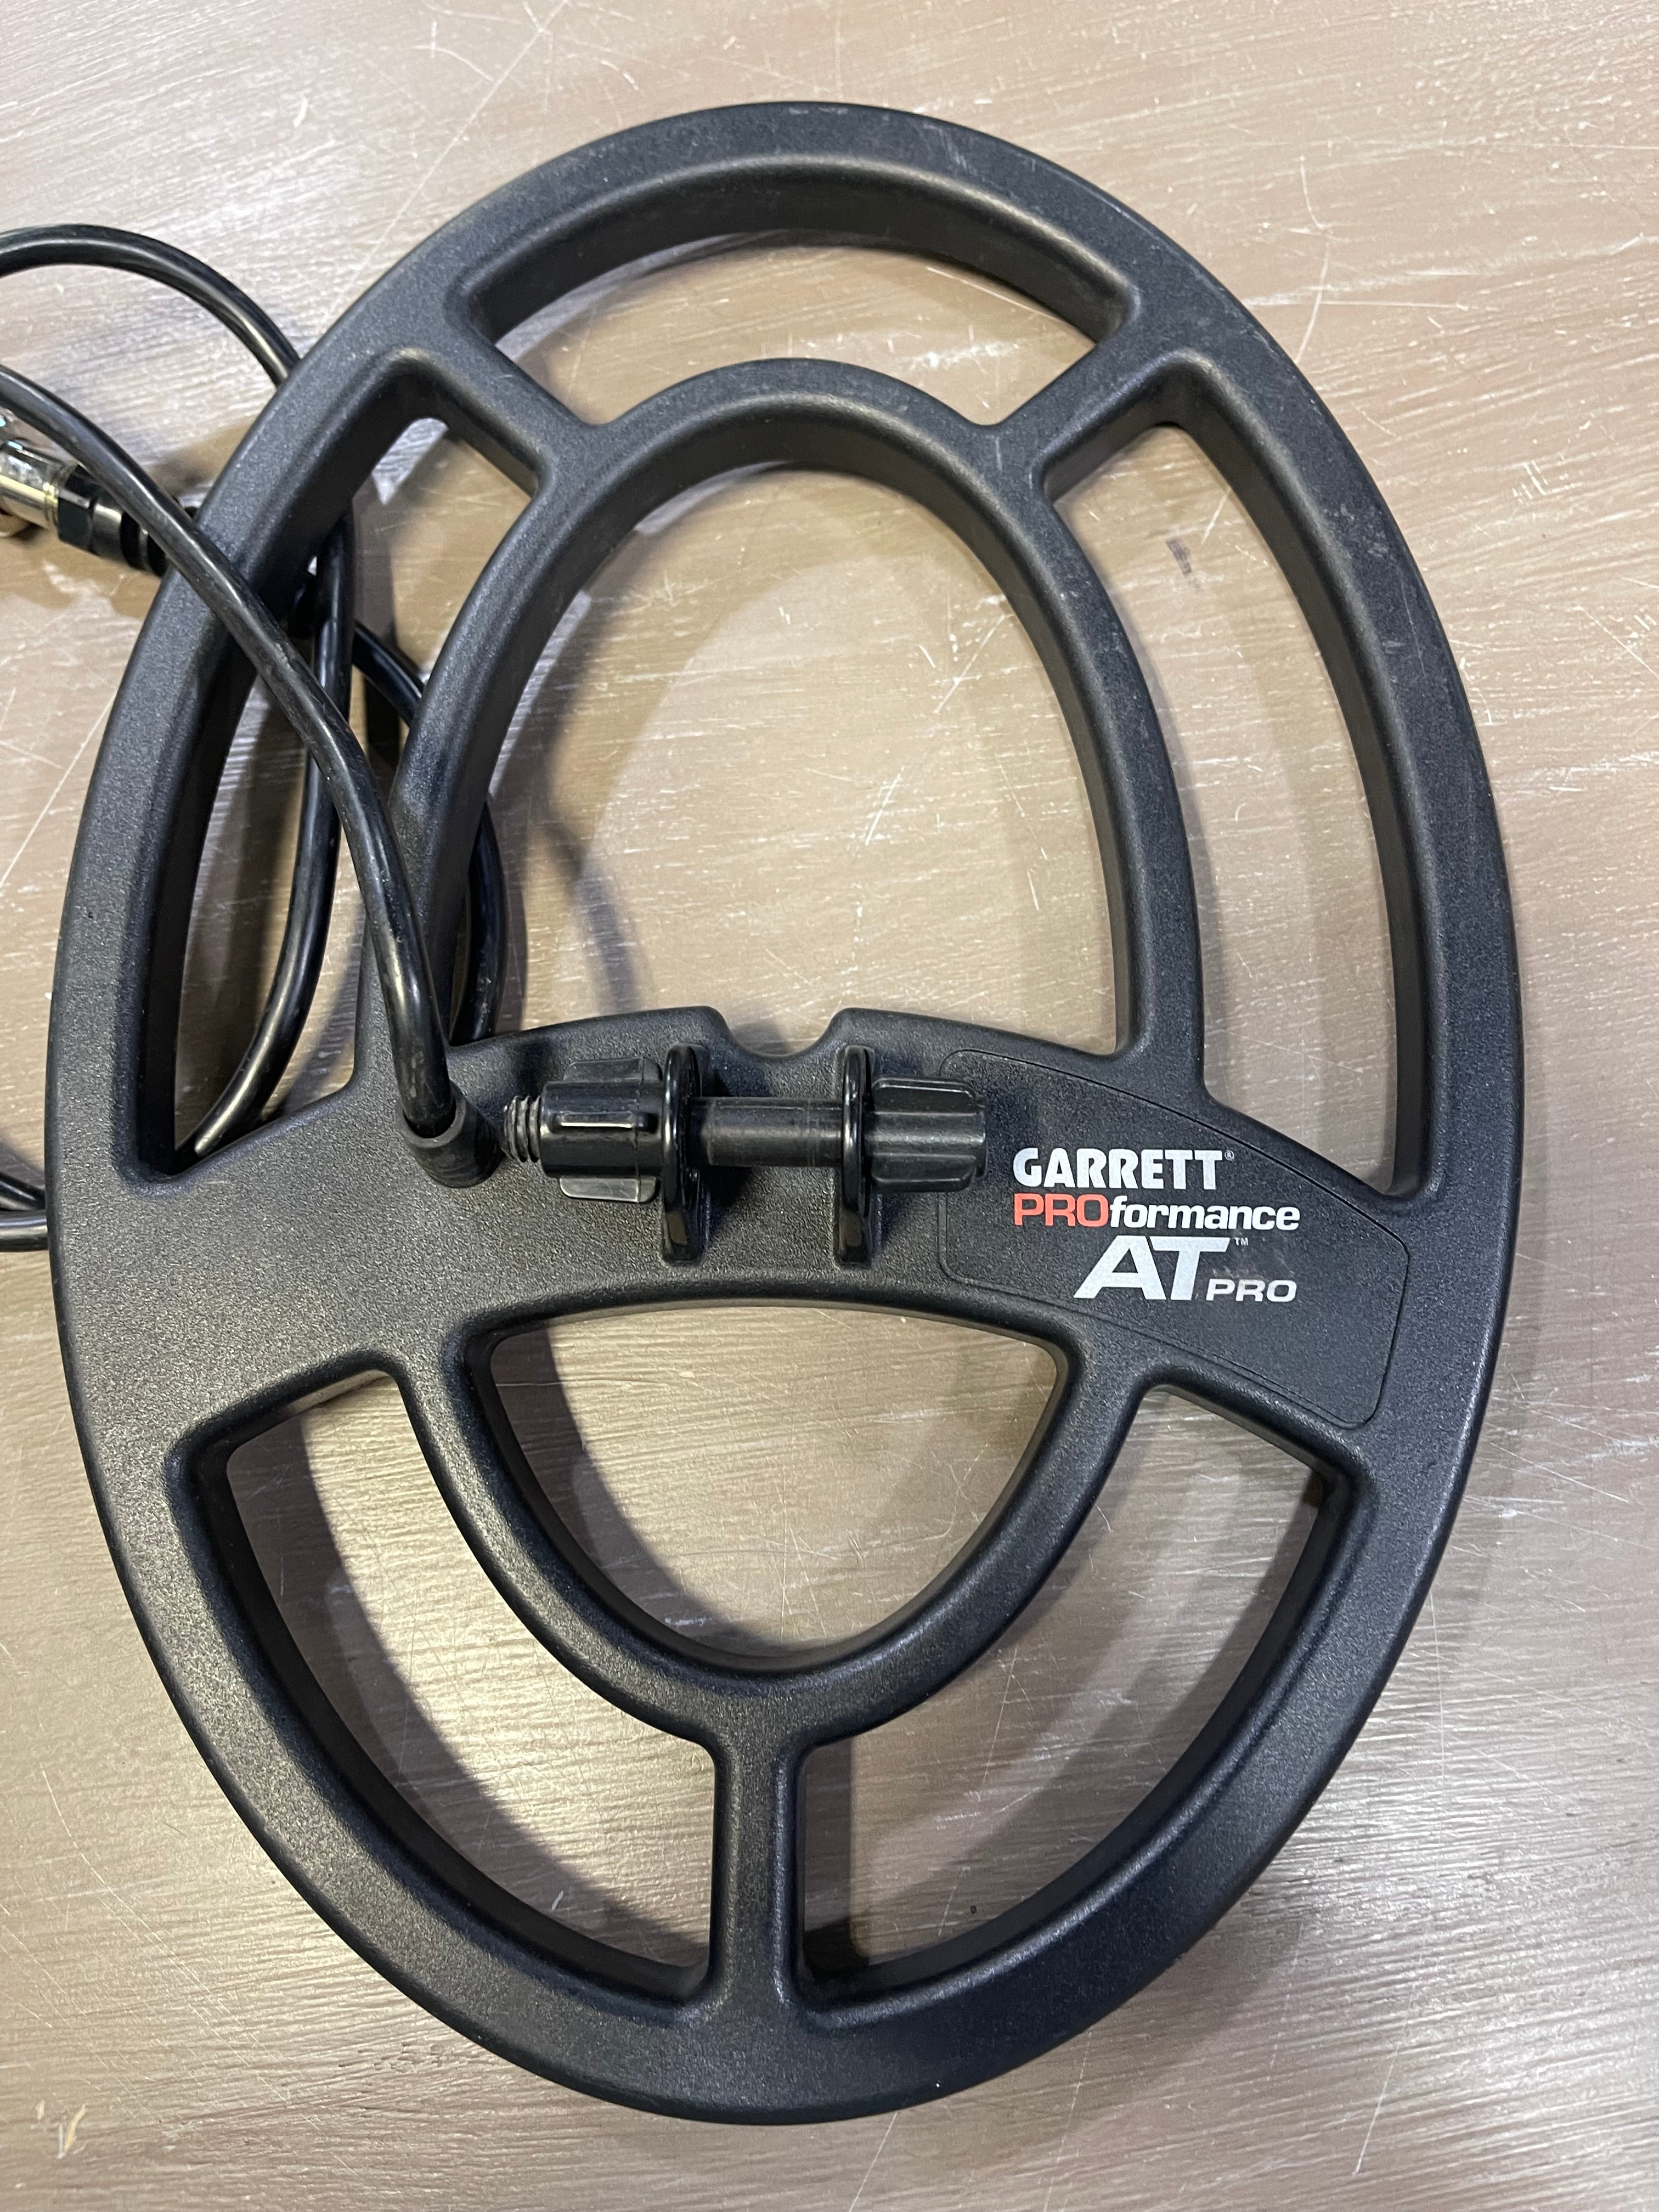 Slightly Used Garrett 9" x 12" PROformance concentric  searchcoil for AT Series Metal Detectors